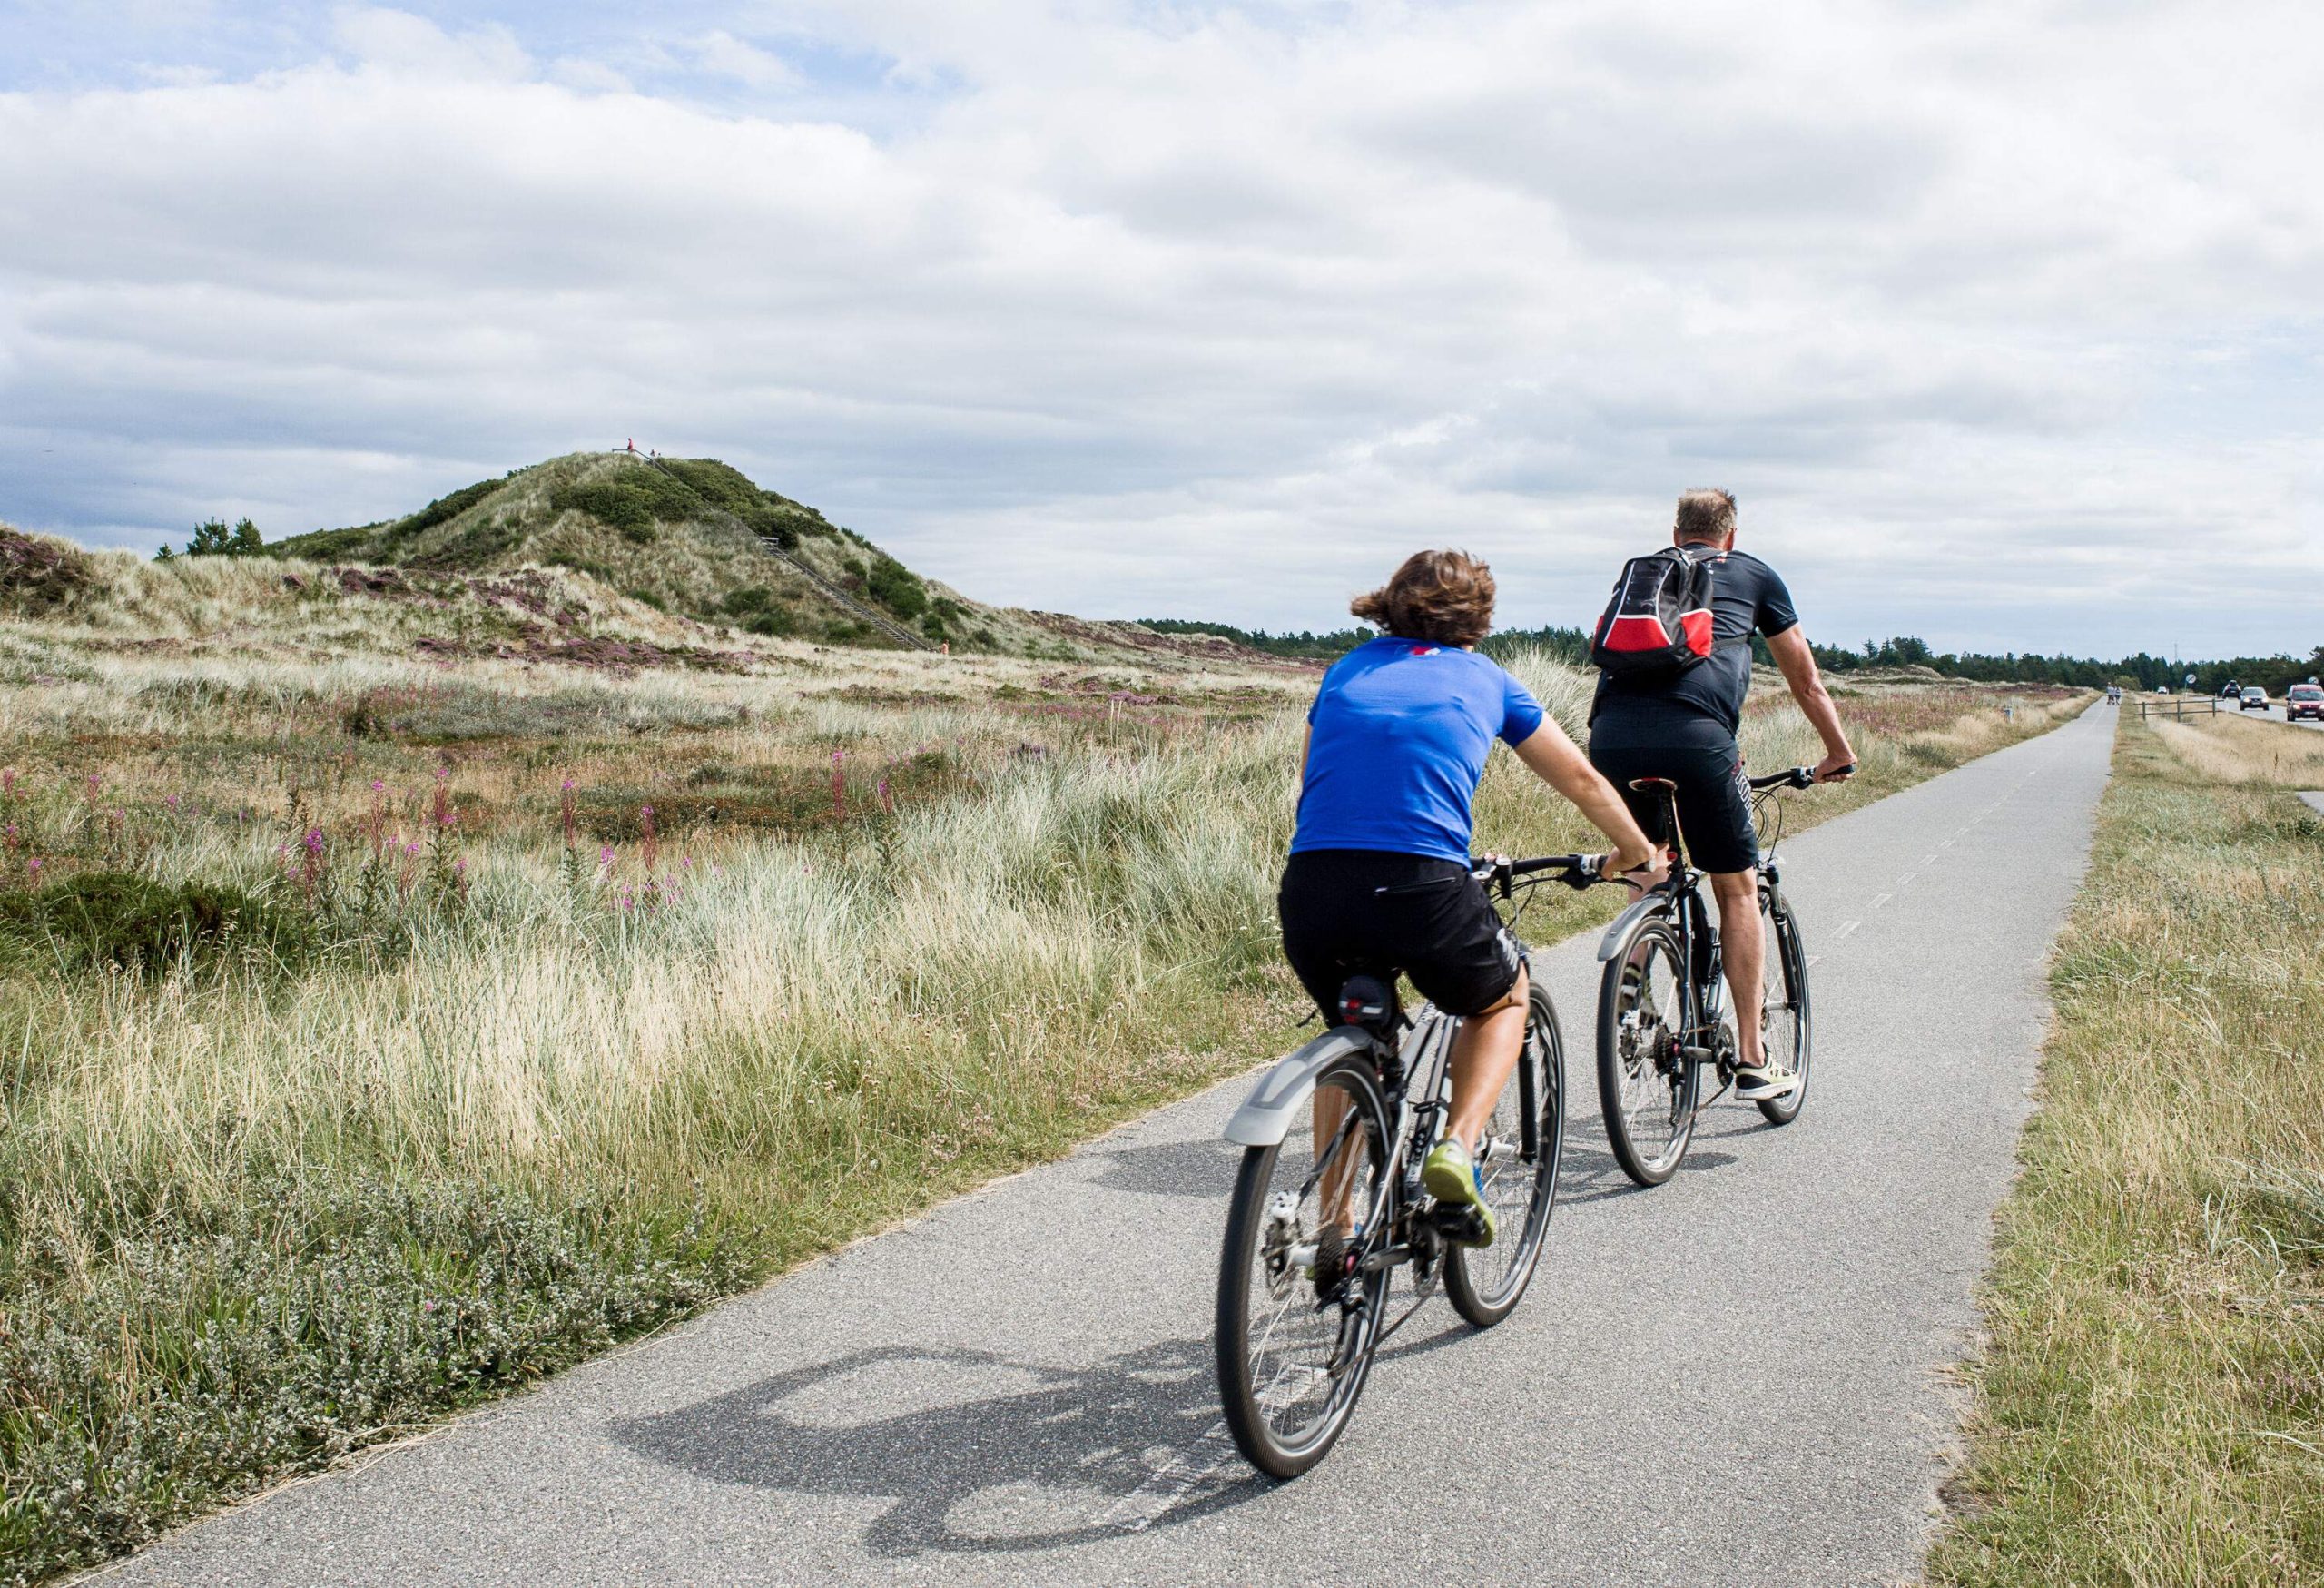 Two people pedal on the paved road where the grassland continues on the side of the main road.